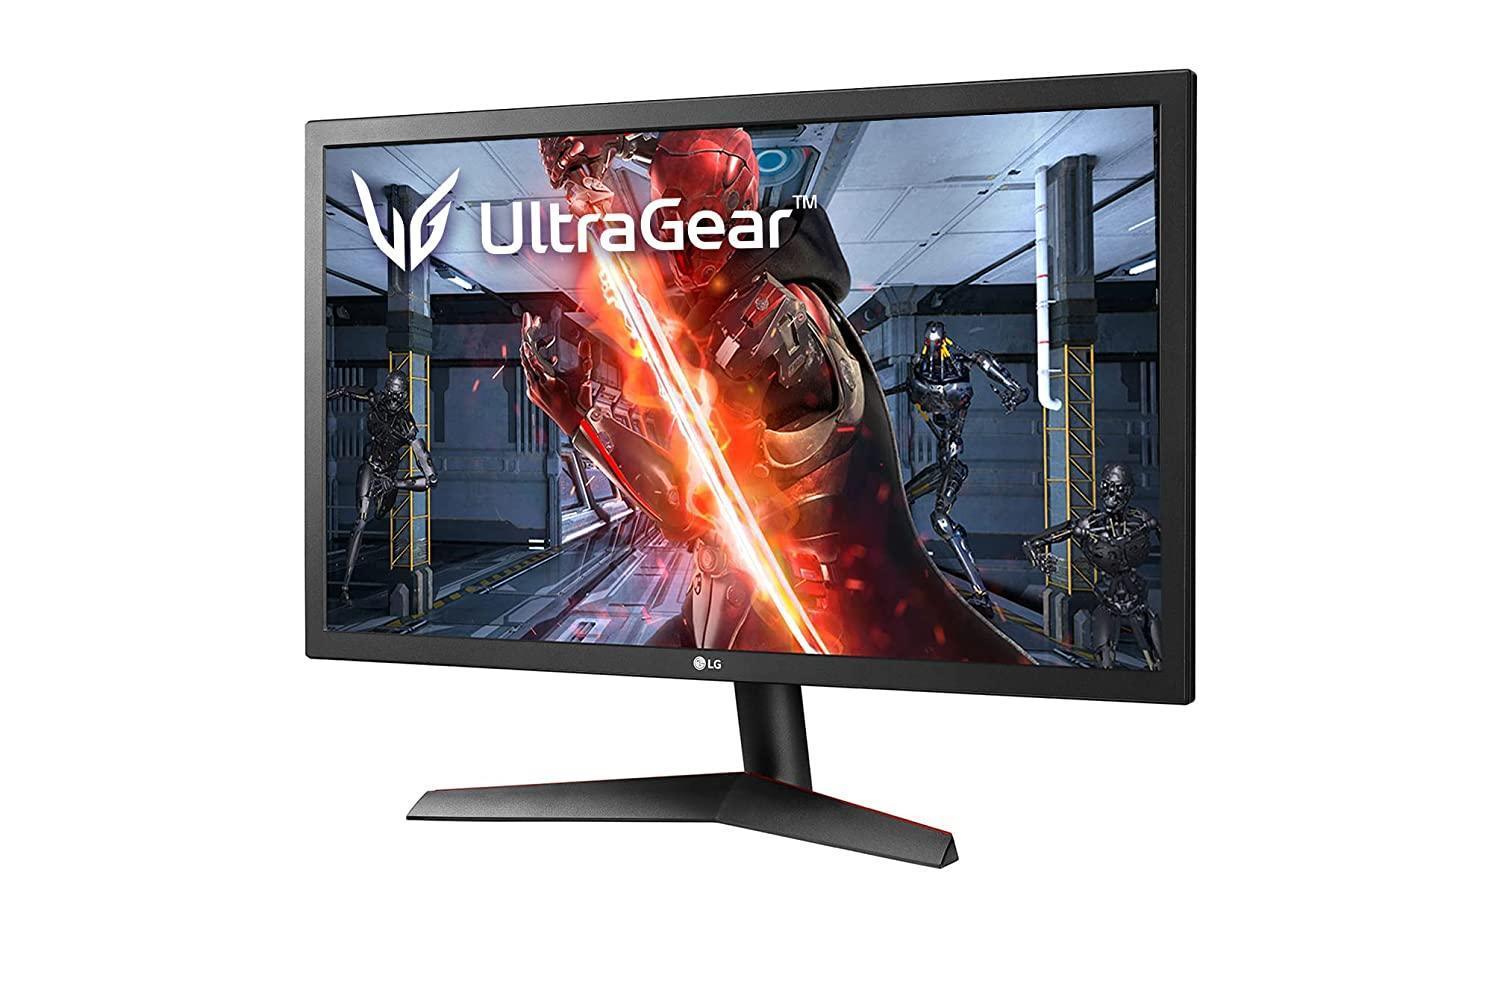 LG Ultragear 60 cm (24 inch) 144Hz, Native 1ms Full HD Gaming Monitor with Radeon Freesync - 24GL600F (Black), Small - Store For Gamers